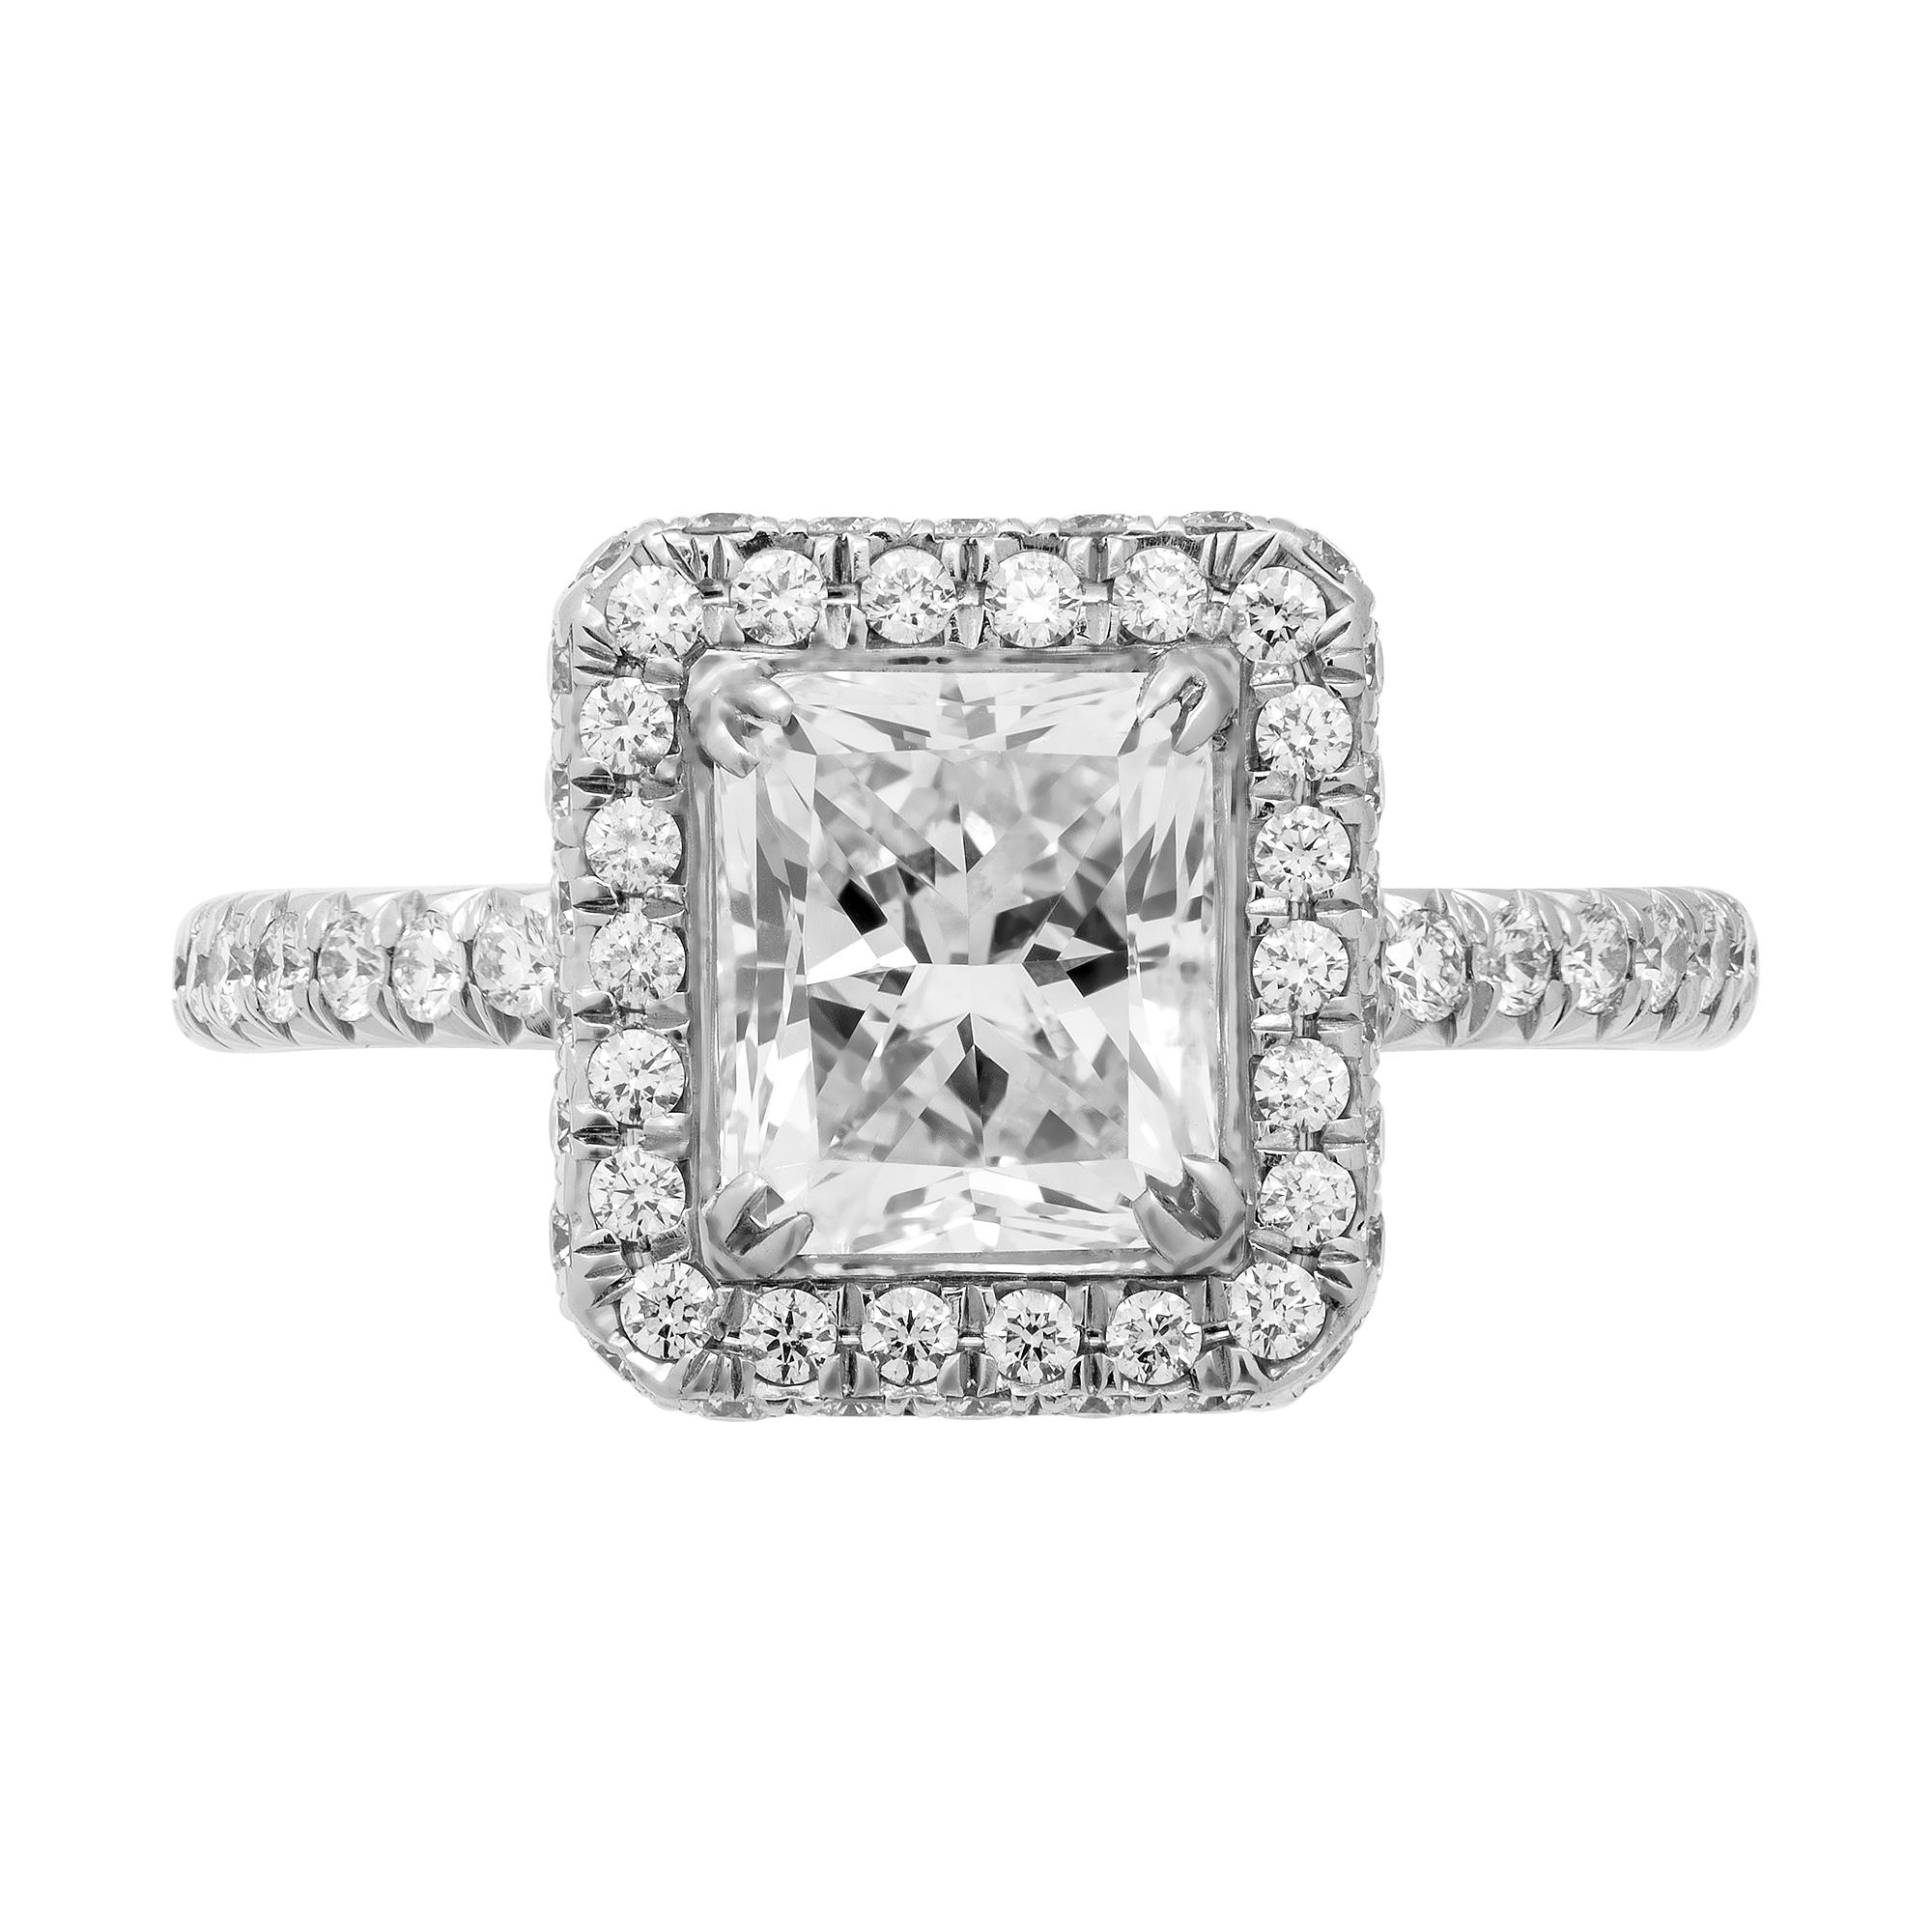 Mounted in handmade custom design setting featuring Platinum 950, diamond shank, fully encrusted gallery under center stone, a true piece of art
Double halo around center stone makes it appear larger and exclusive. Setting features exceptional pave